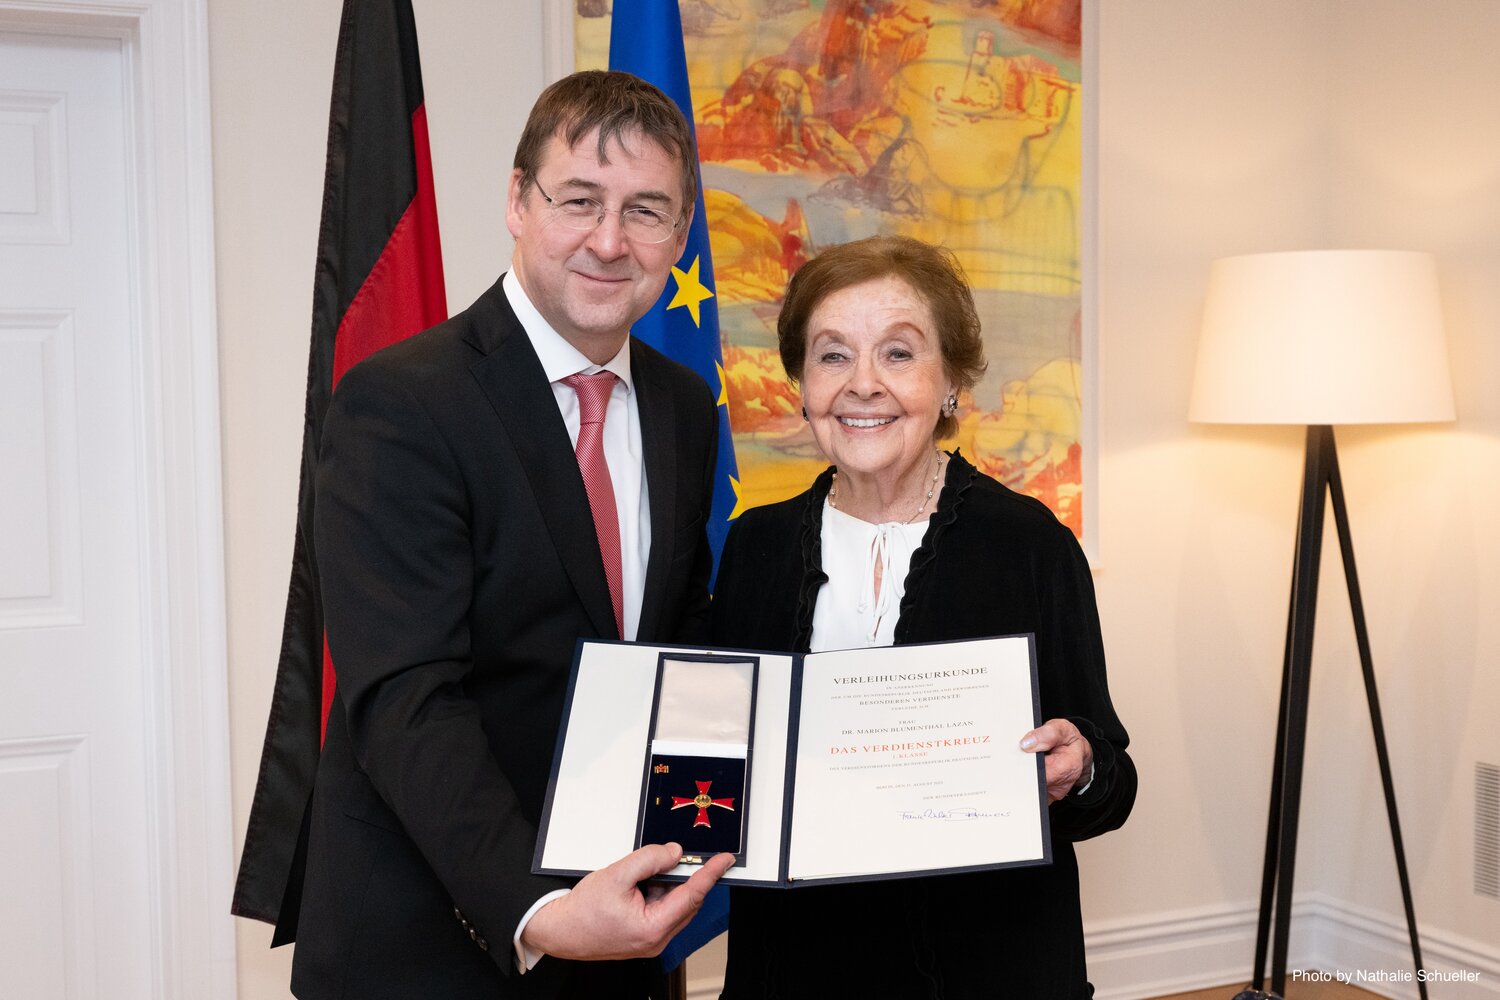 David Gill, Germany’s consul general, presented Marion Blumenthal Lazan with a Cross of the Order of Merit of the Federal Republic of Germany, the highest honor given by the German government, on Jan. 21.